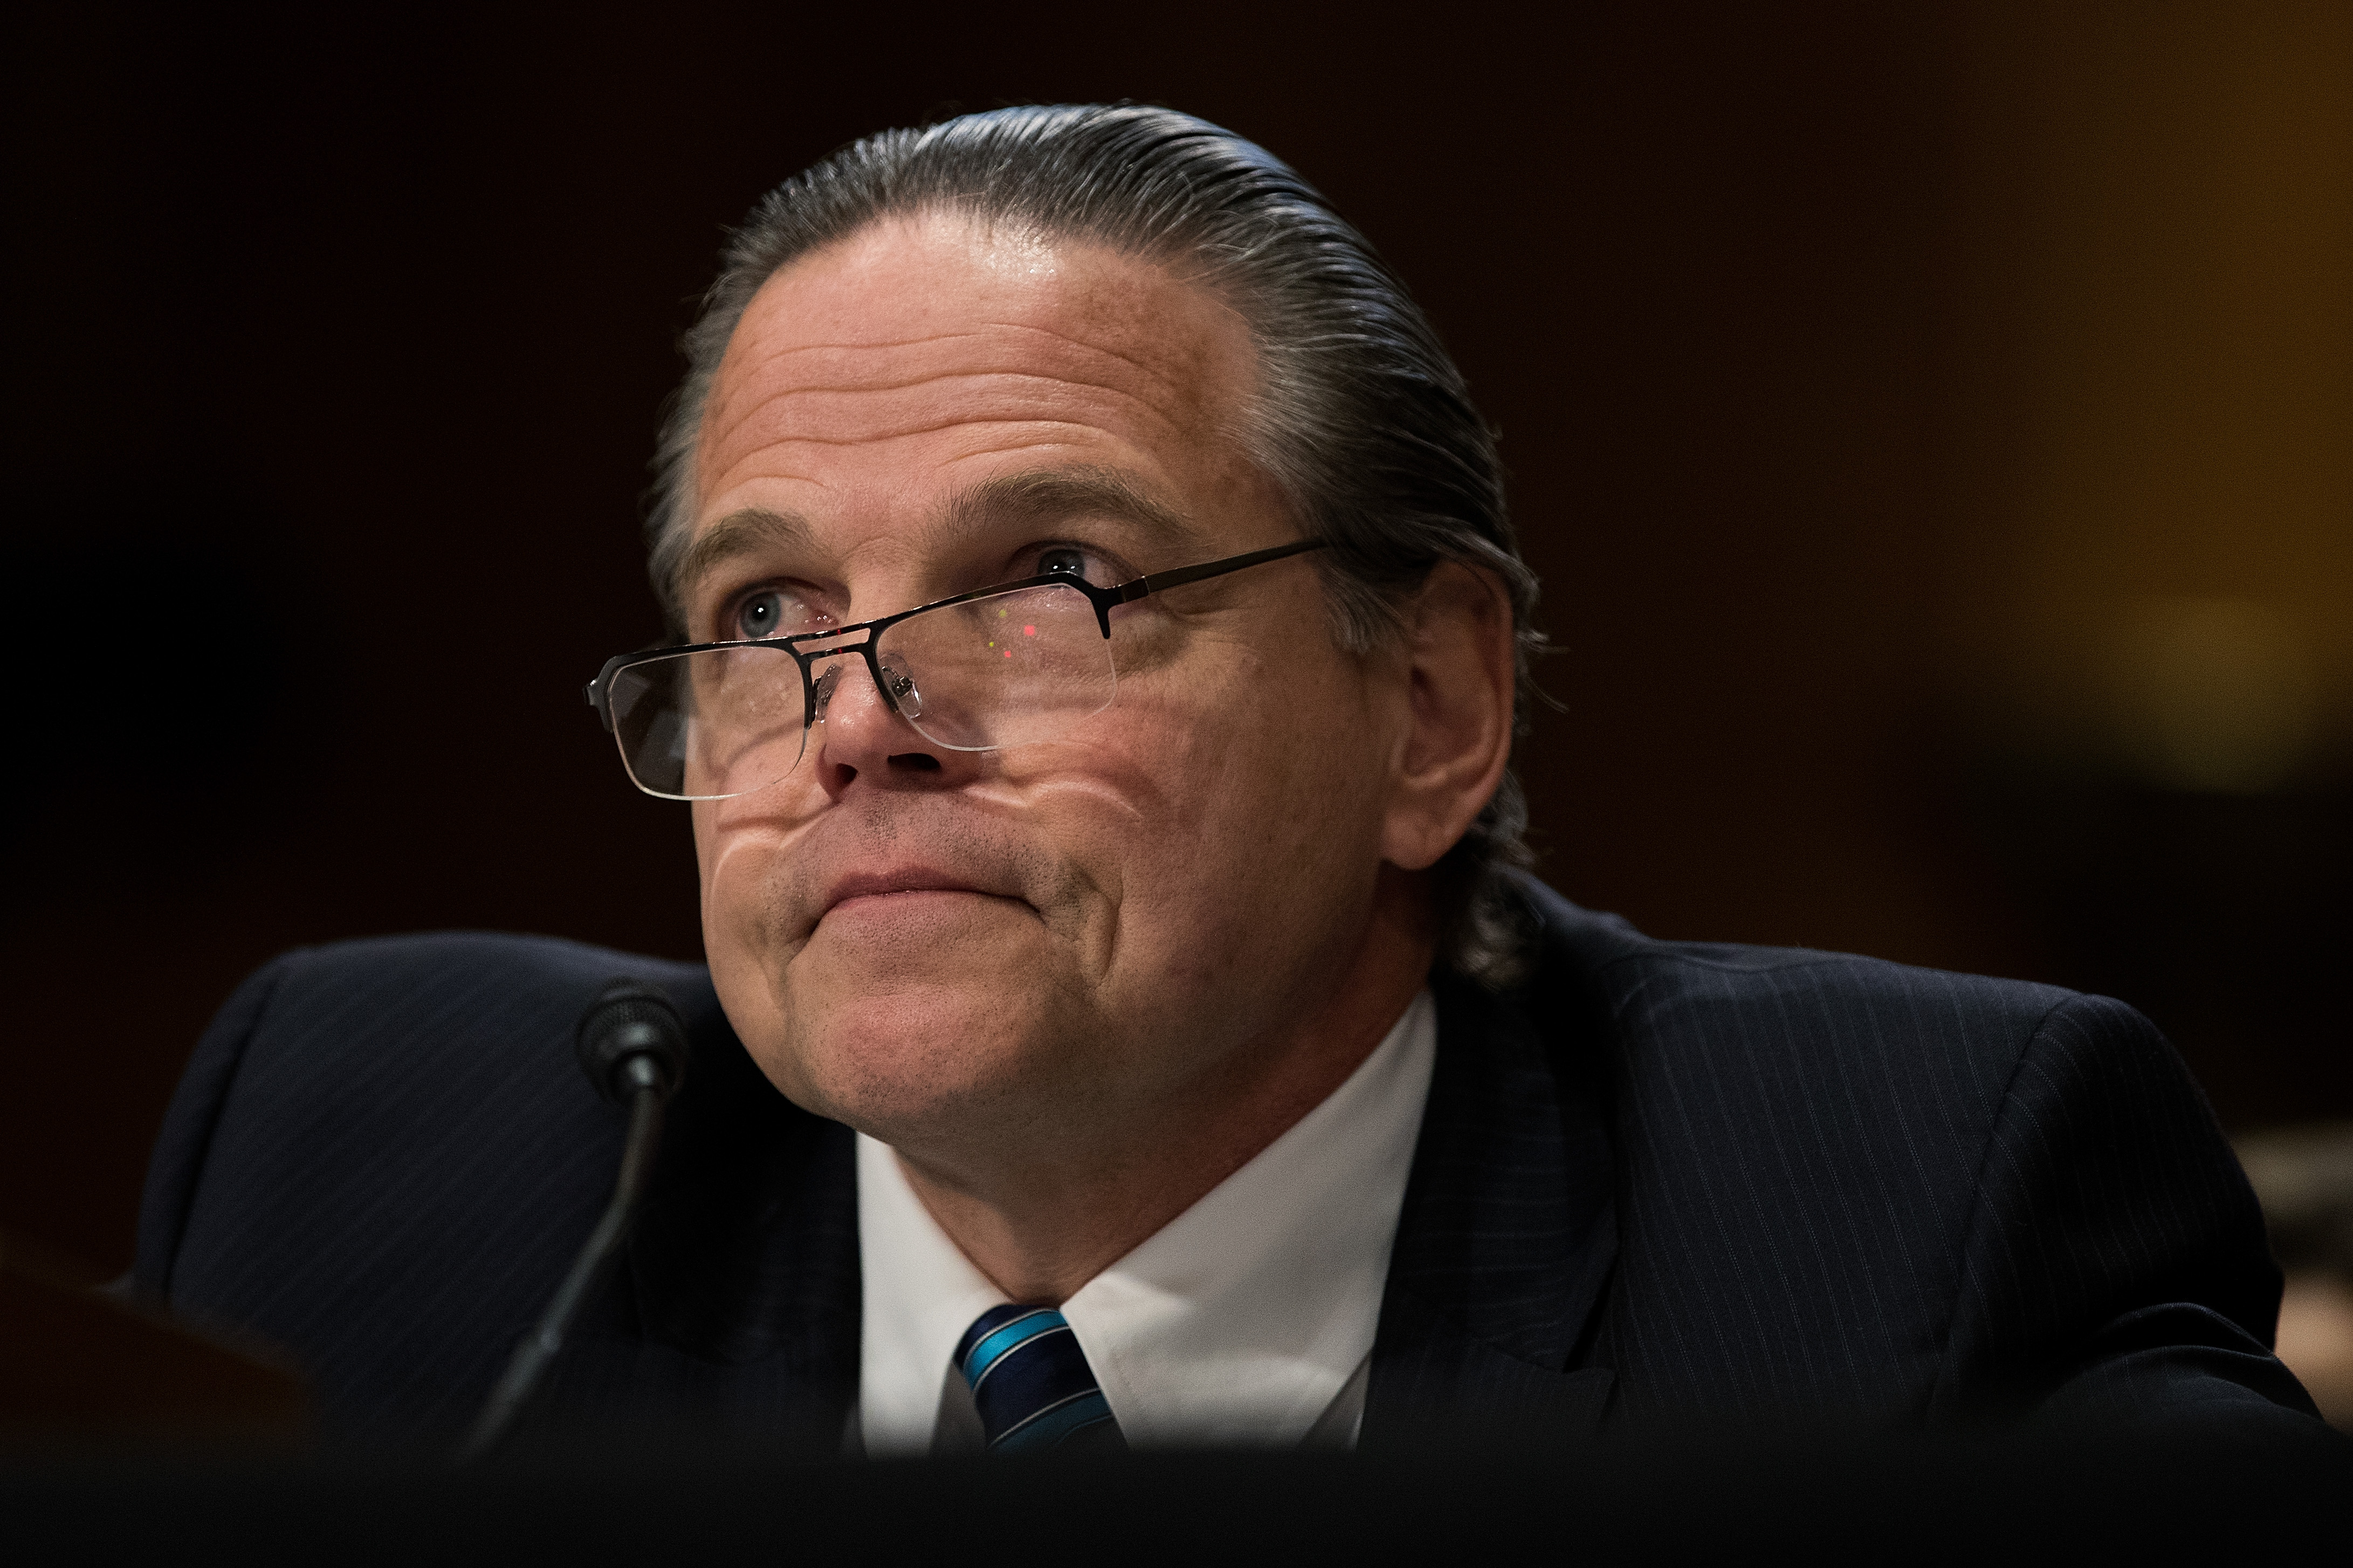 Ambassador to Zambia Daniel Foote was recalled to the U.S. after his criticism of Zambia's record on gay rights sparked pushback from President Edgar Lungu. (Getty Images&mdash;2016 Getty Images)